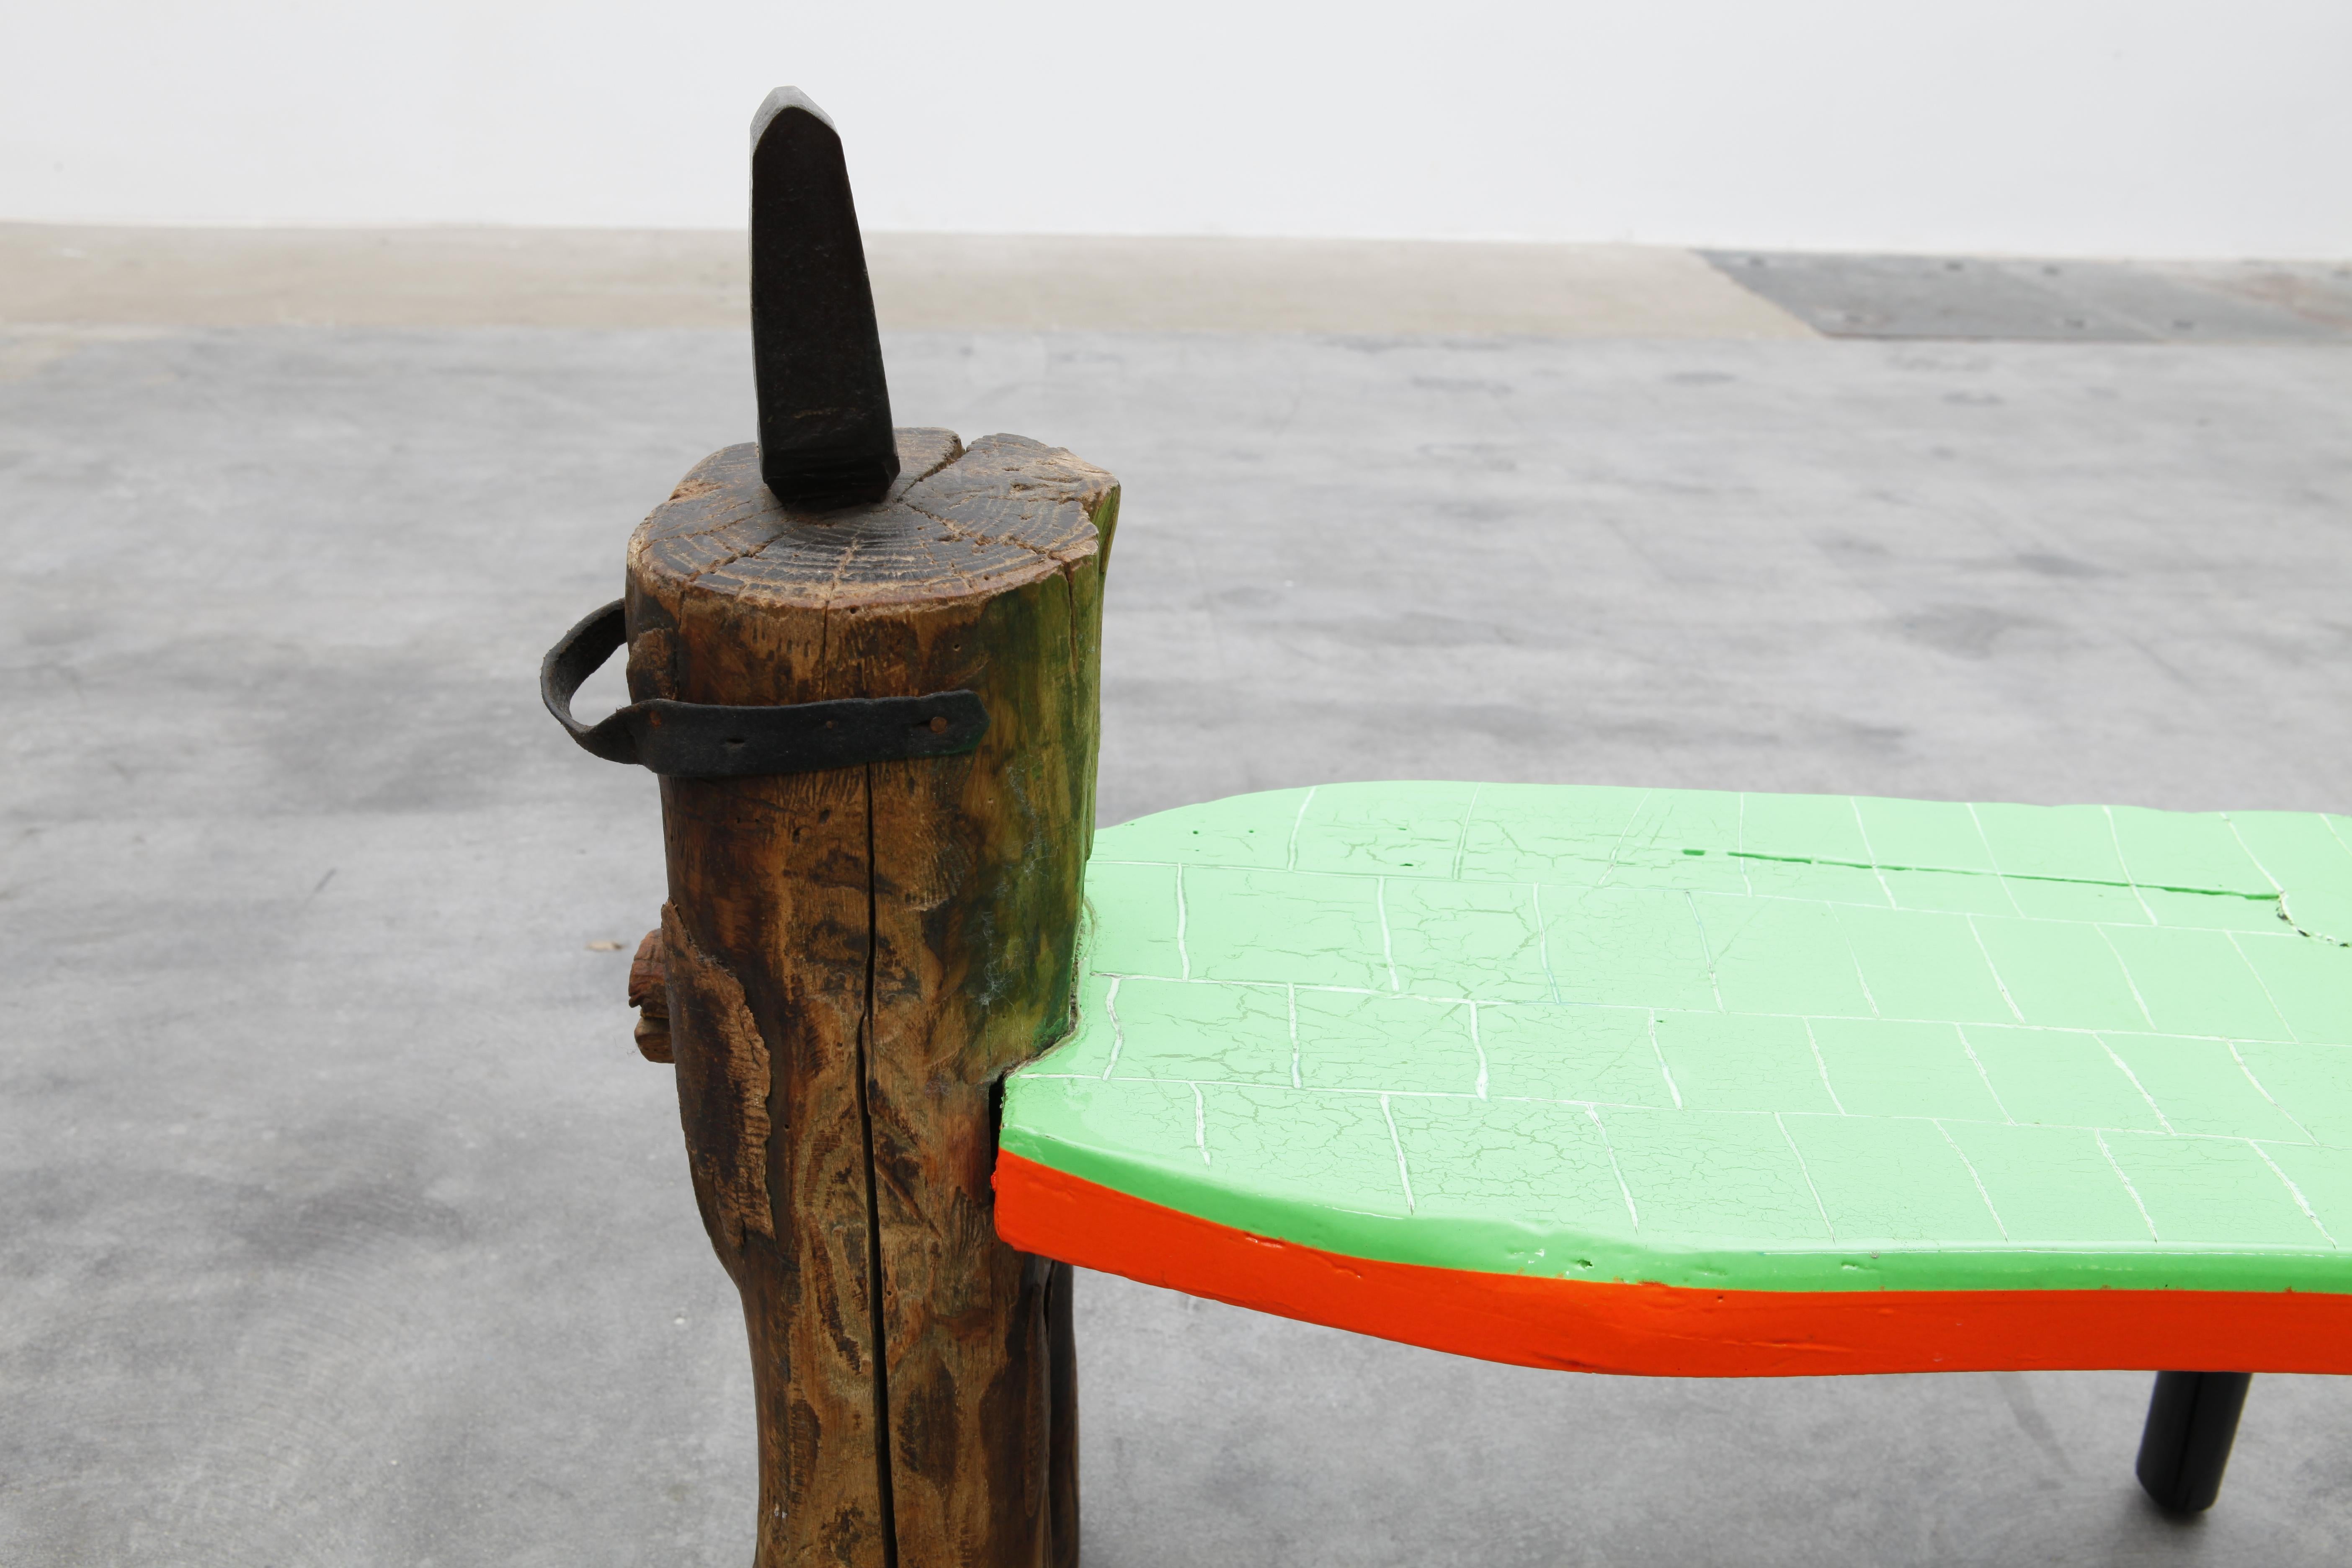 This redesigned ancient work stool has been abroaded, spraypainted in neon green and orange and finished in high gloss 2K lacquer. The piece combines modernity and ancient craftsmanship and works as a perfect item for your hallway, a conversation